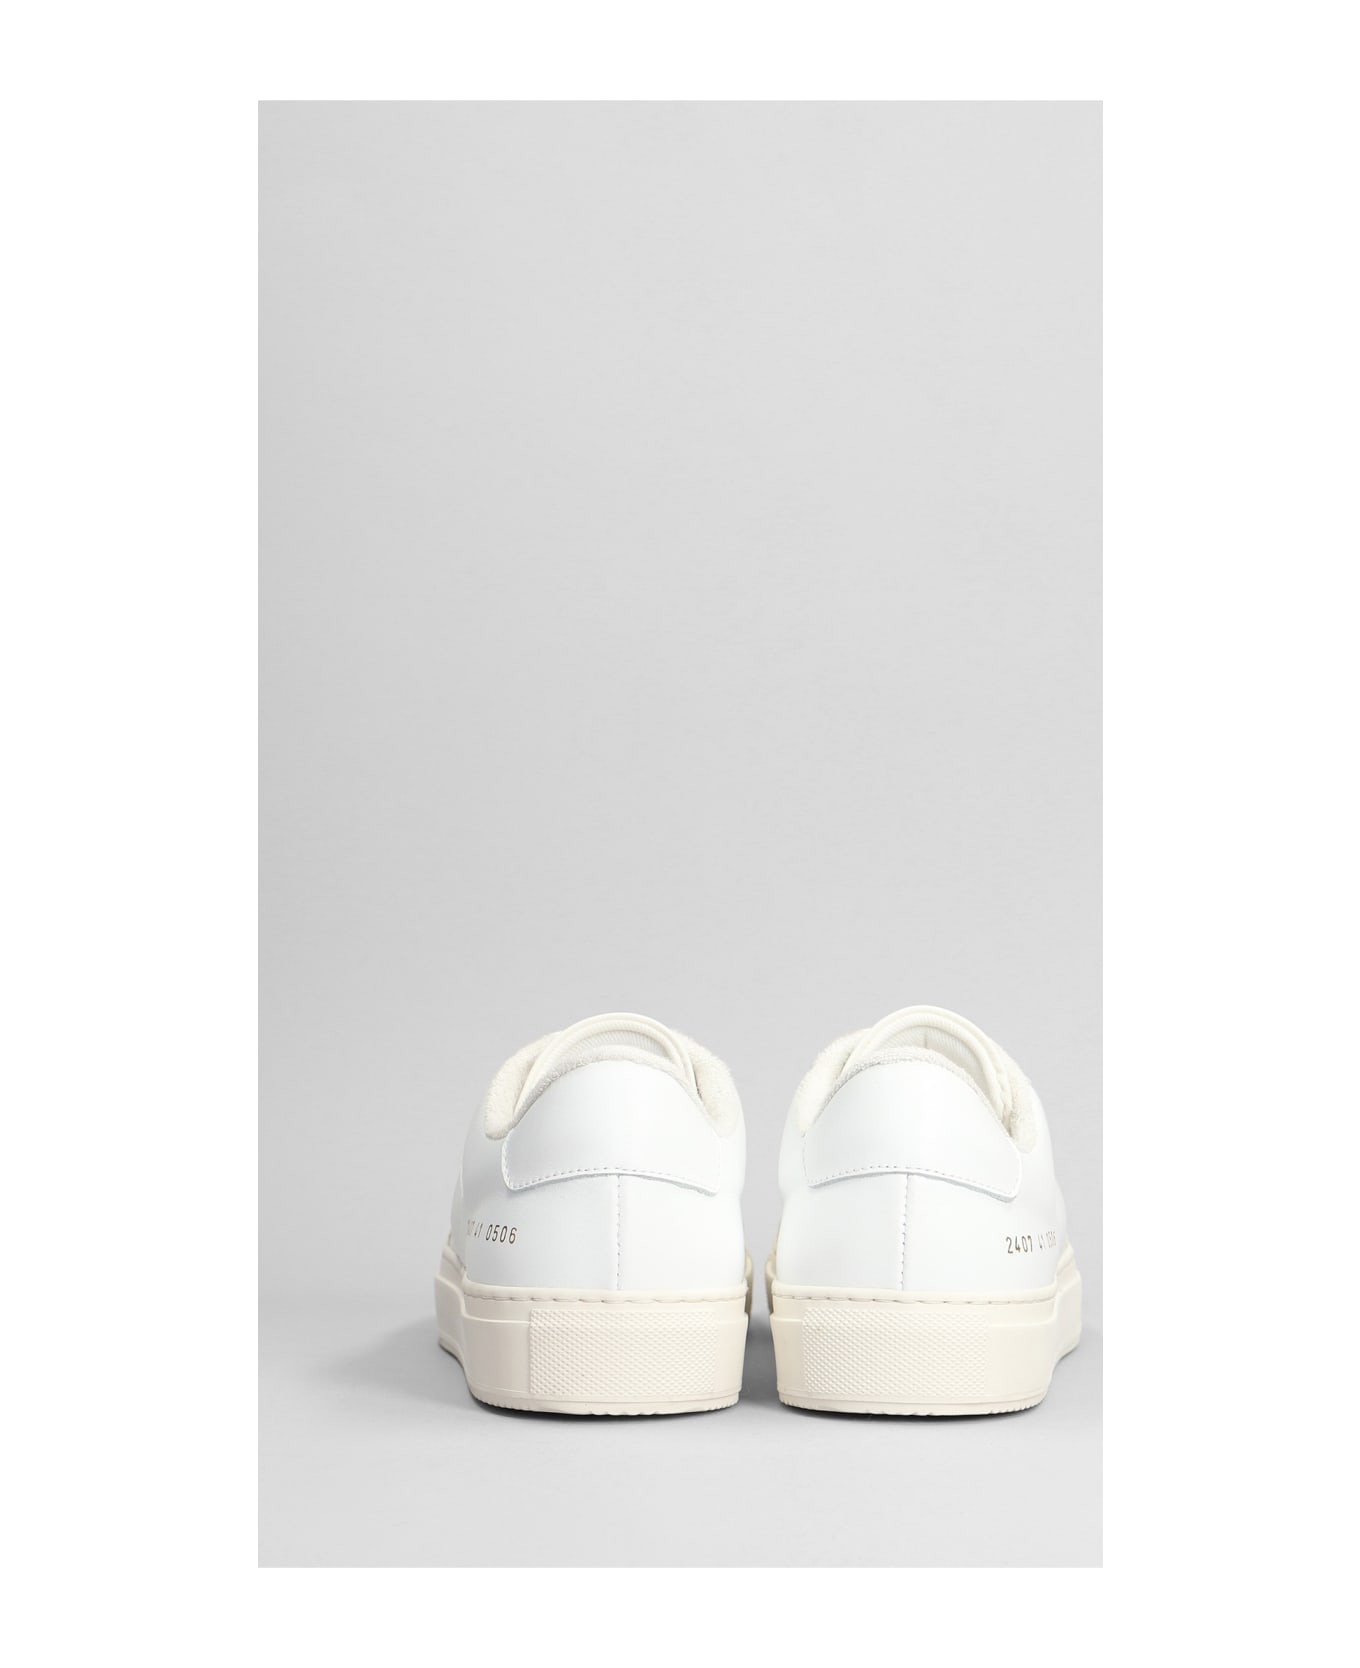 Common Projects Tennis Pro Sneakers In White Leather - White